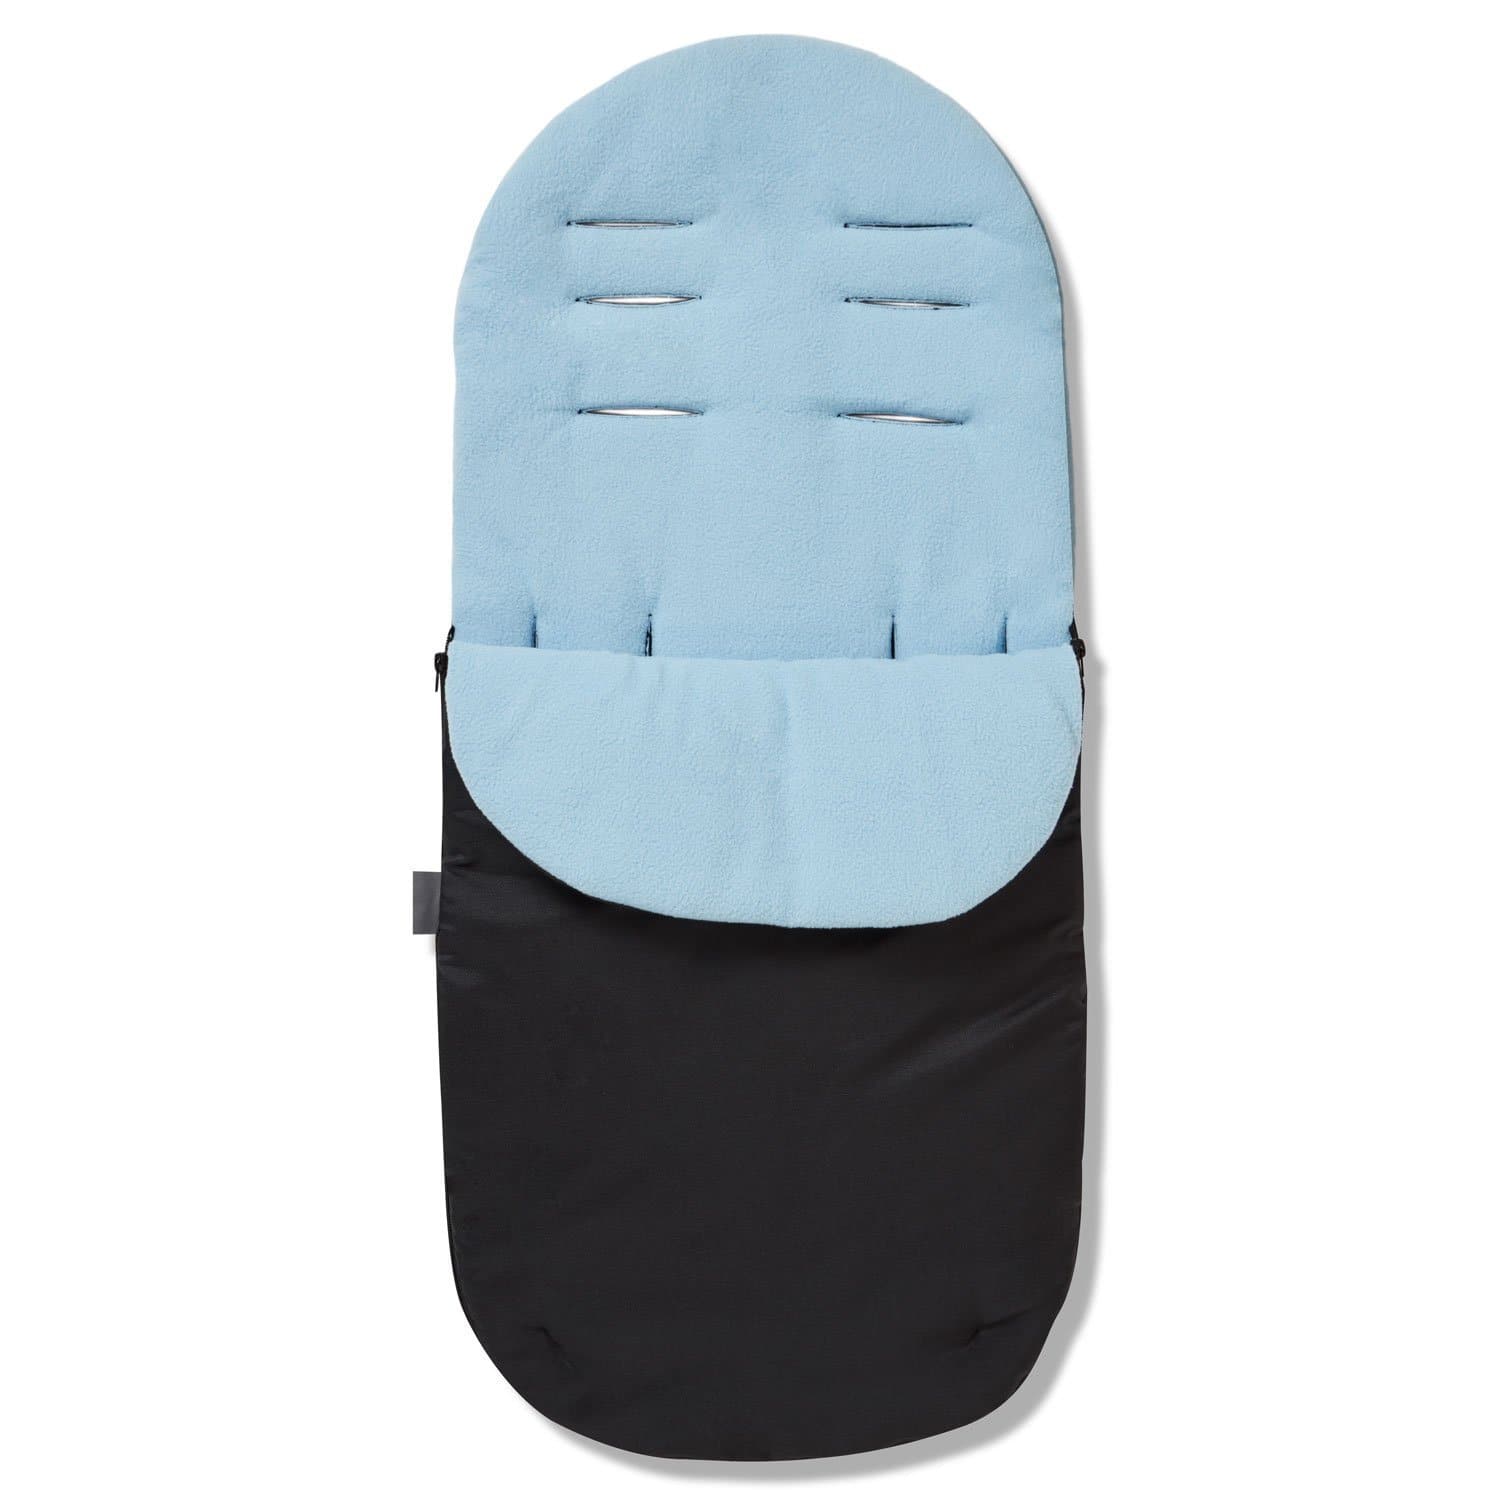 Footmuff / Cosy Toes Compatible with Orbit - Light Blue / Fits All Models | For Your Little One